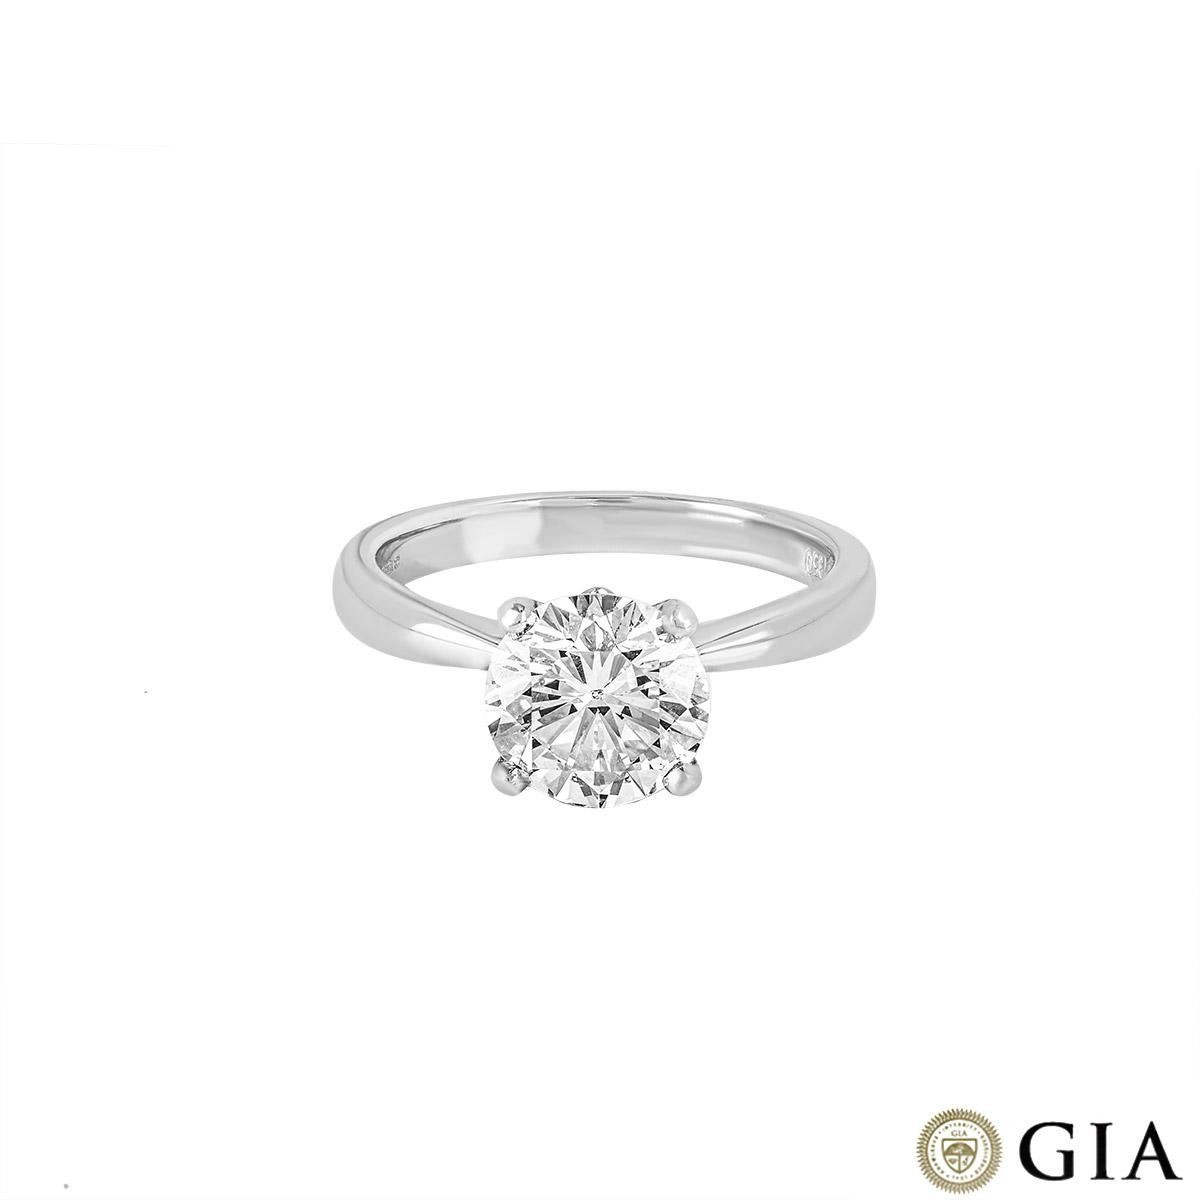 GIA Certified Platinum Round Brilliant Cut Diamond Ring 2.00ct L/SI1 In Excellent Condition For Sale In London, GB